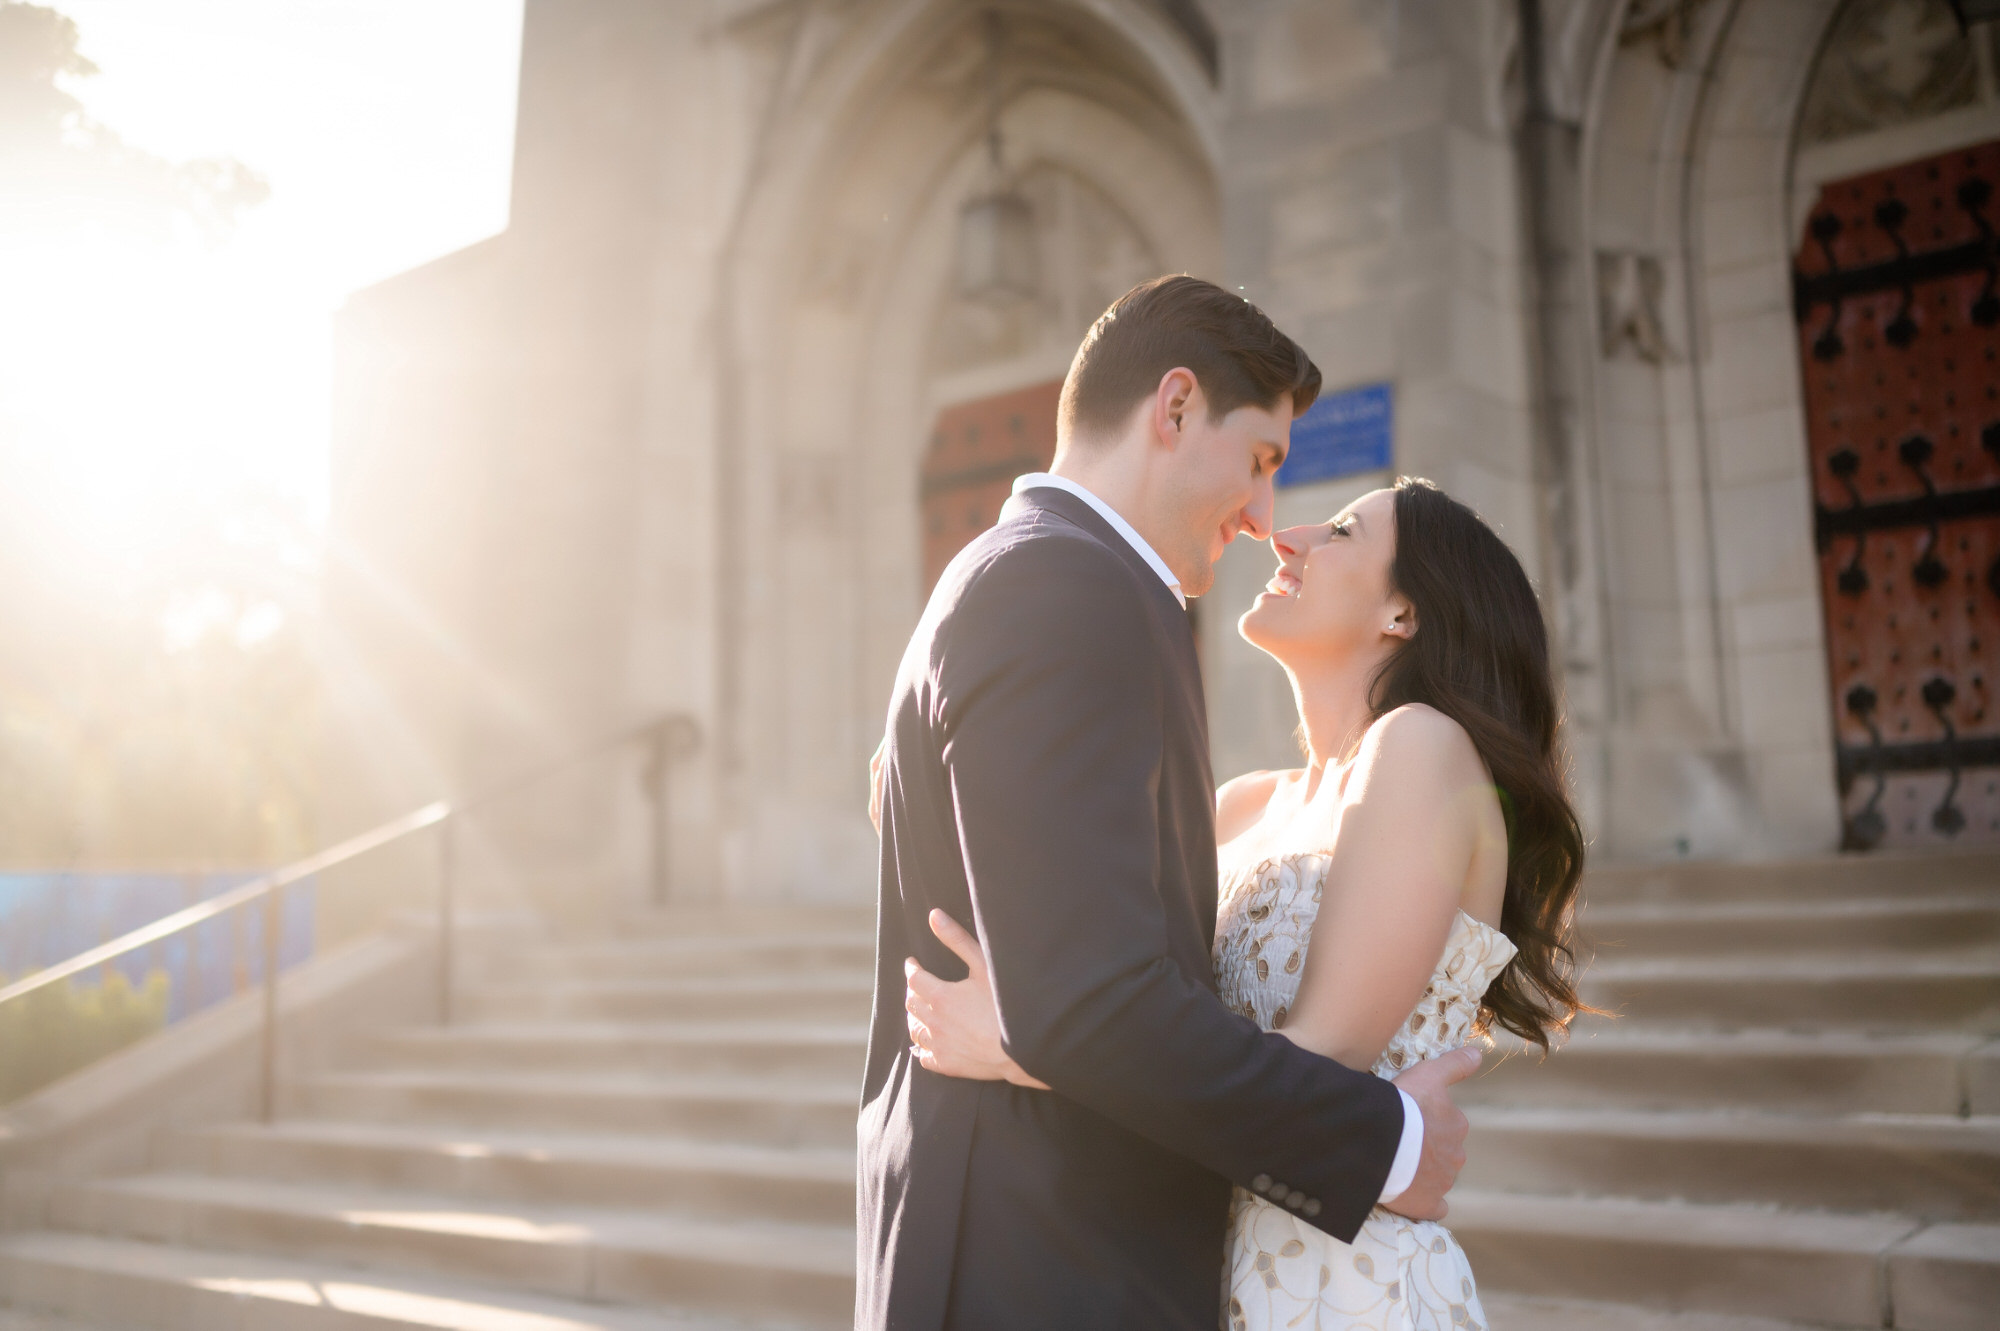 heinz chapel engagement picture • Engagement Photography - Leeann Marie Photographer Pittsburgh